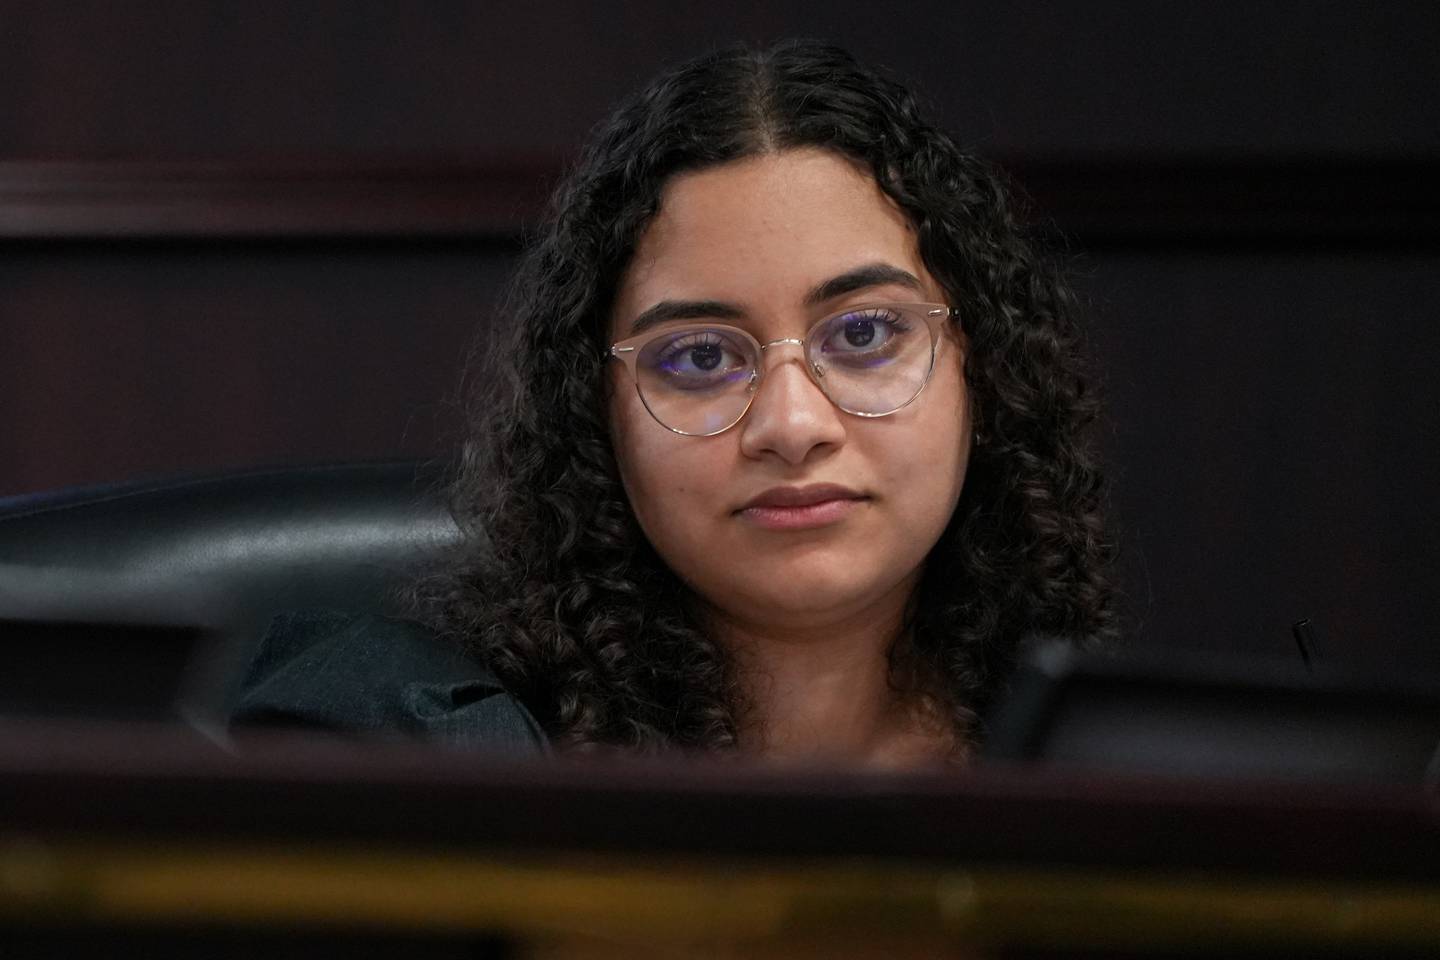 Roah Hassan, Student Member of the Baltimore County Board of Education, listens during their bi-weekly meeting at the Greenwood Campus on 8/23/22.